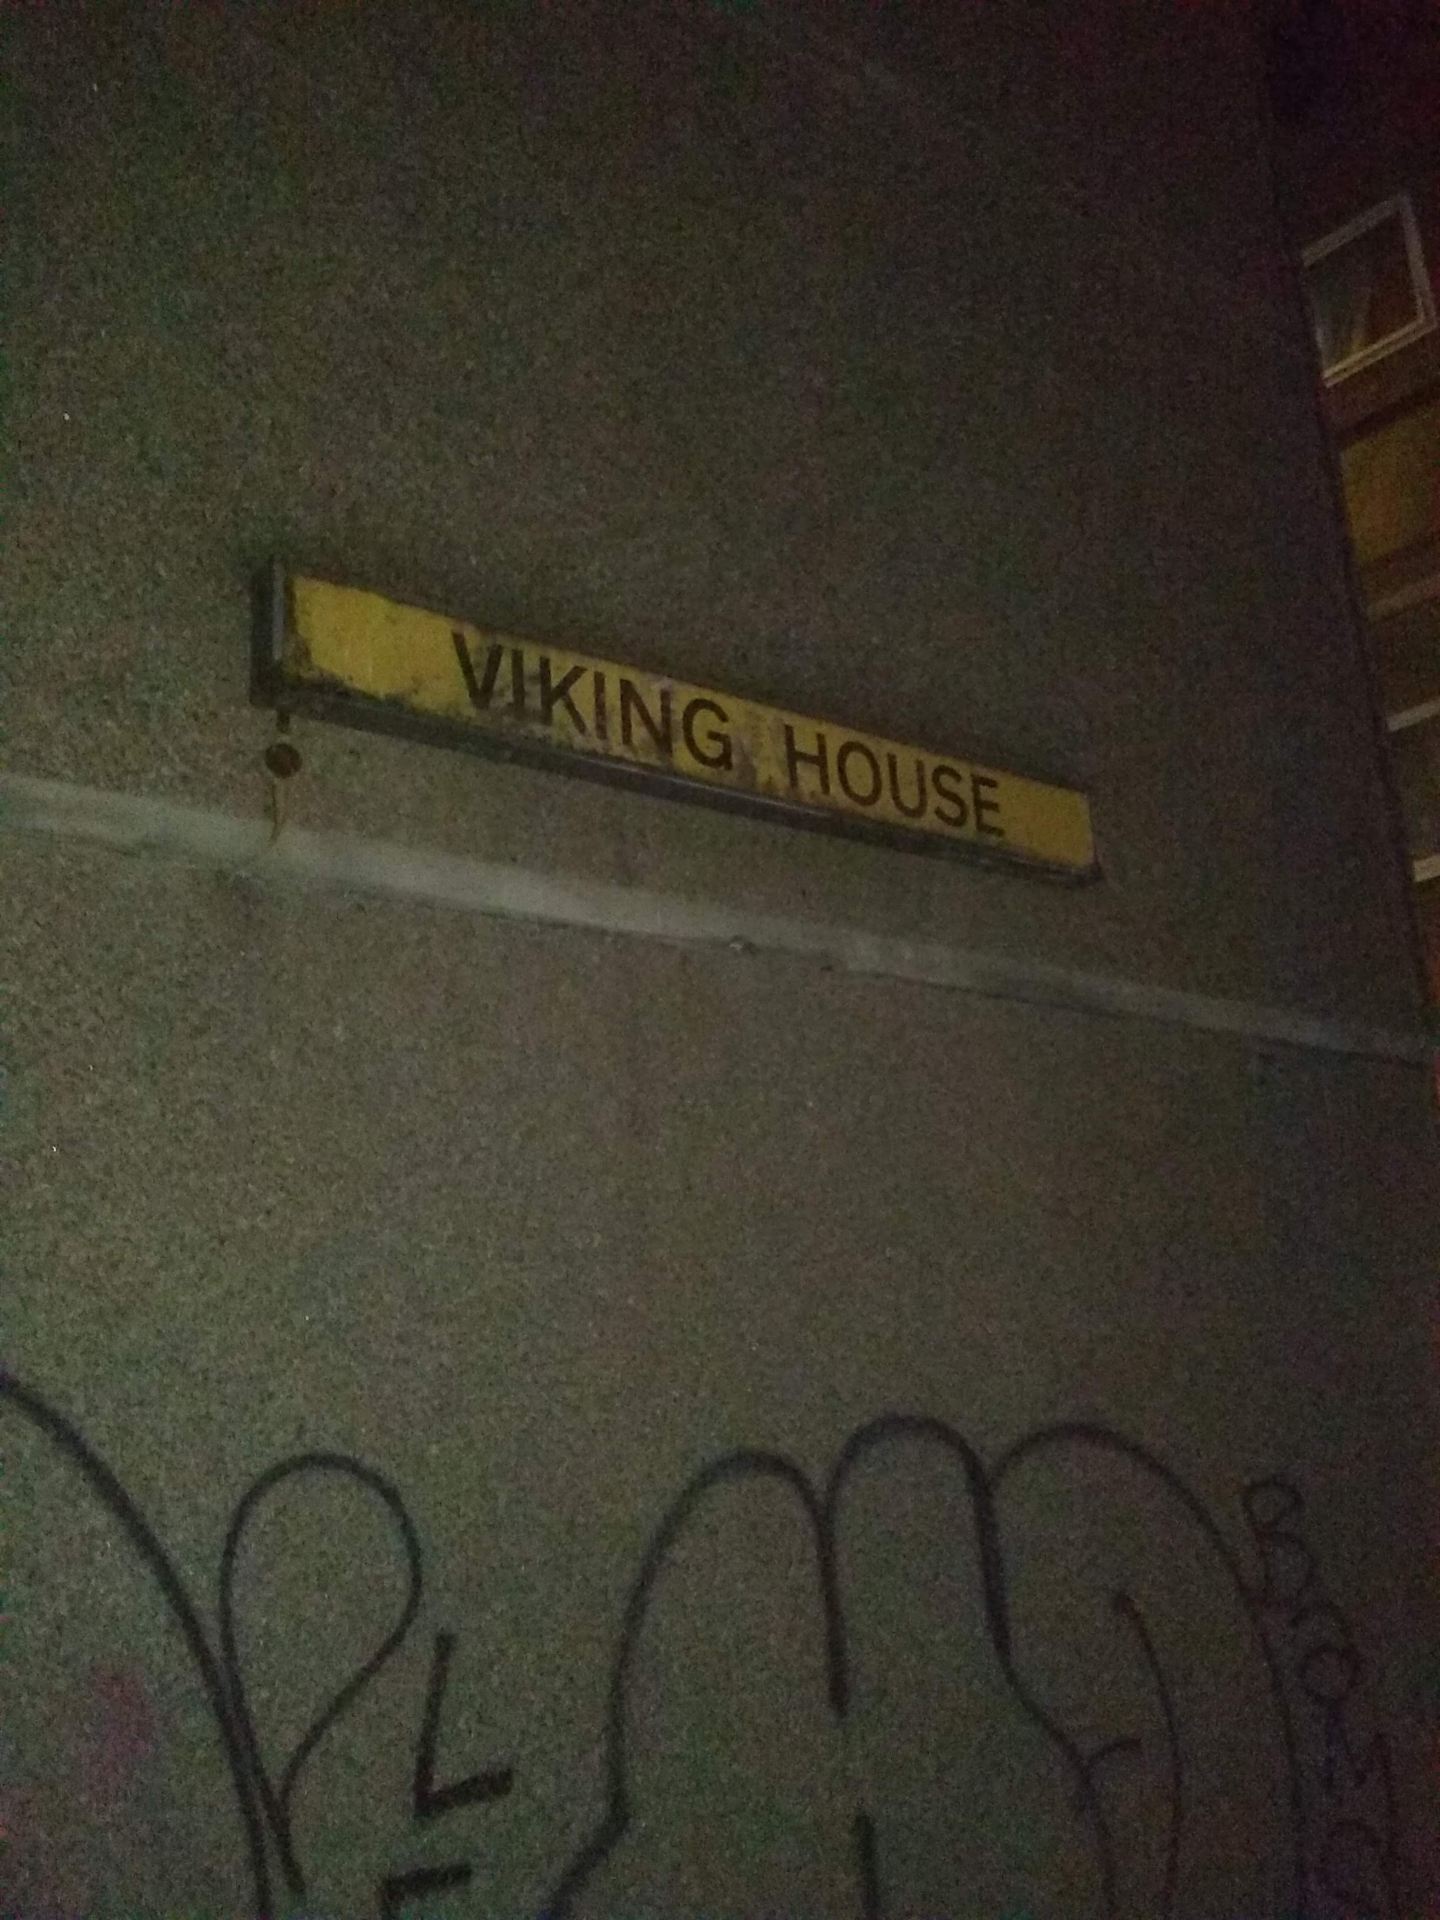 An image of a sign that reads "Viking House".